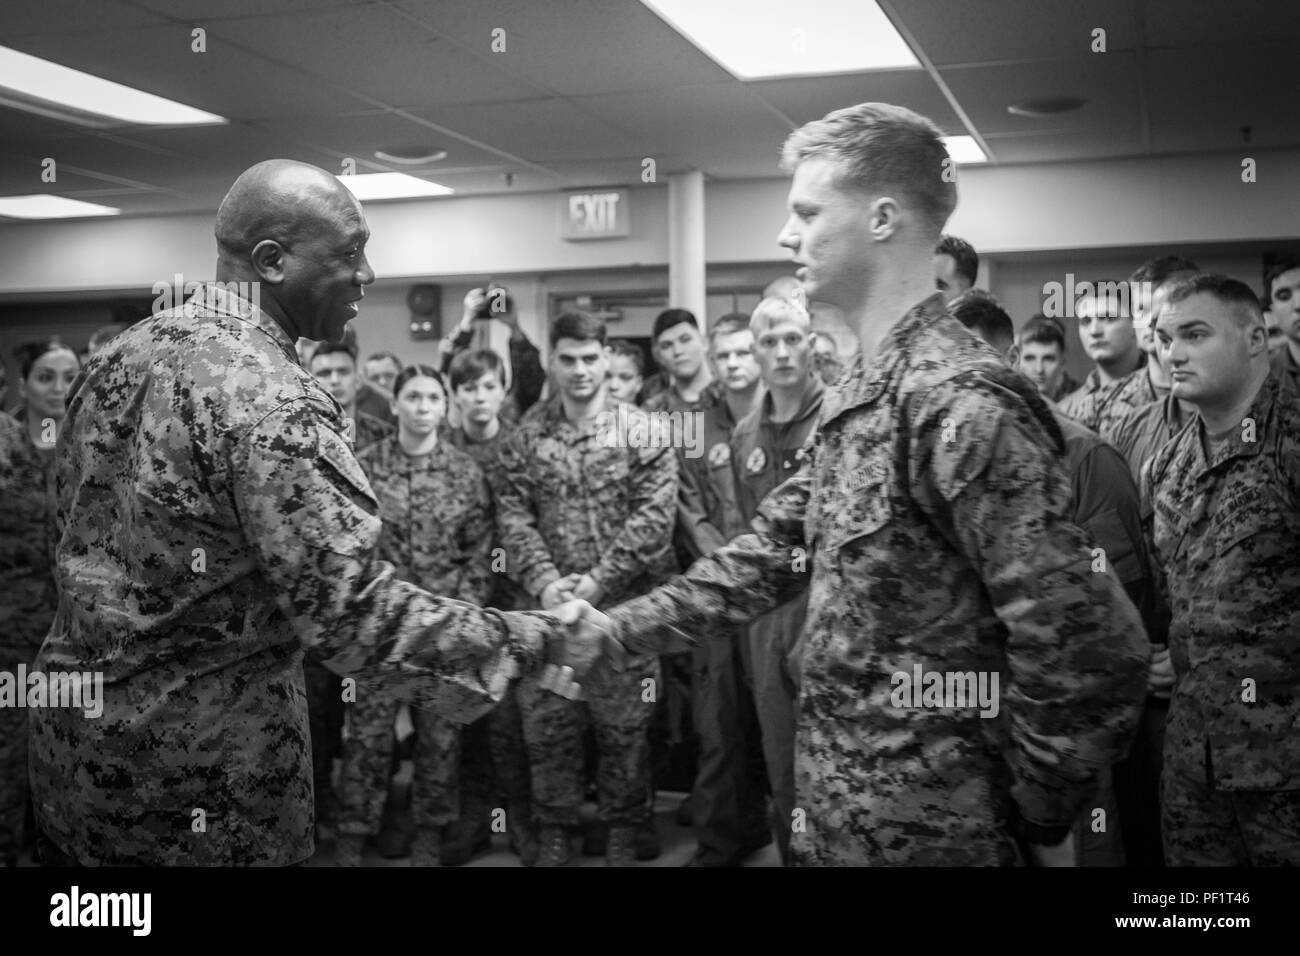 The 18th Sergeant Major of the Marine Corps, Ronald L. Green, visits Marines assigned to Chemical Biological Incident Response Force (CBIRF) aboard Naval Support Facility Indian Head, Md., Feb. 18, 2016. The mission of CBIRF is to respond to a chemical, biological, radiological, nuclear or high-yield explosive threat or event in order to assist local, state, or federal agencies and the geographical combatant commanders.  (U.S. Marine Corps photo by Sgt. Melissa Marnell, Office of the Sergeant Major of the Marine Corps/Released) Stock Photo